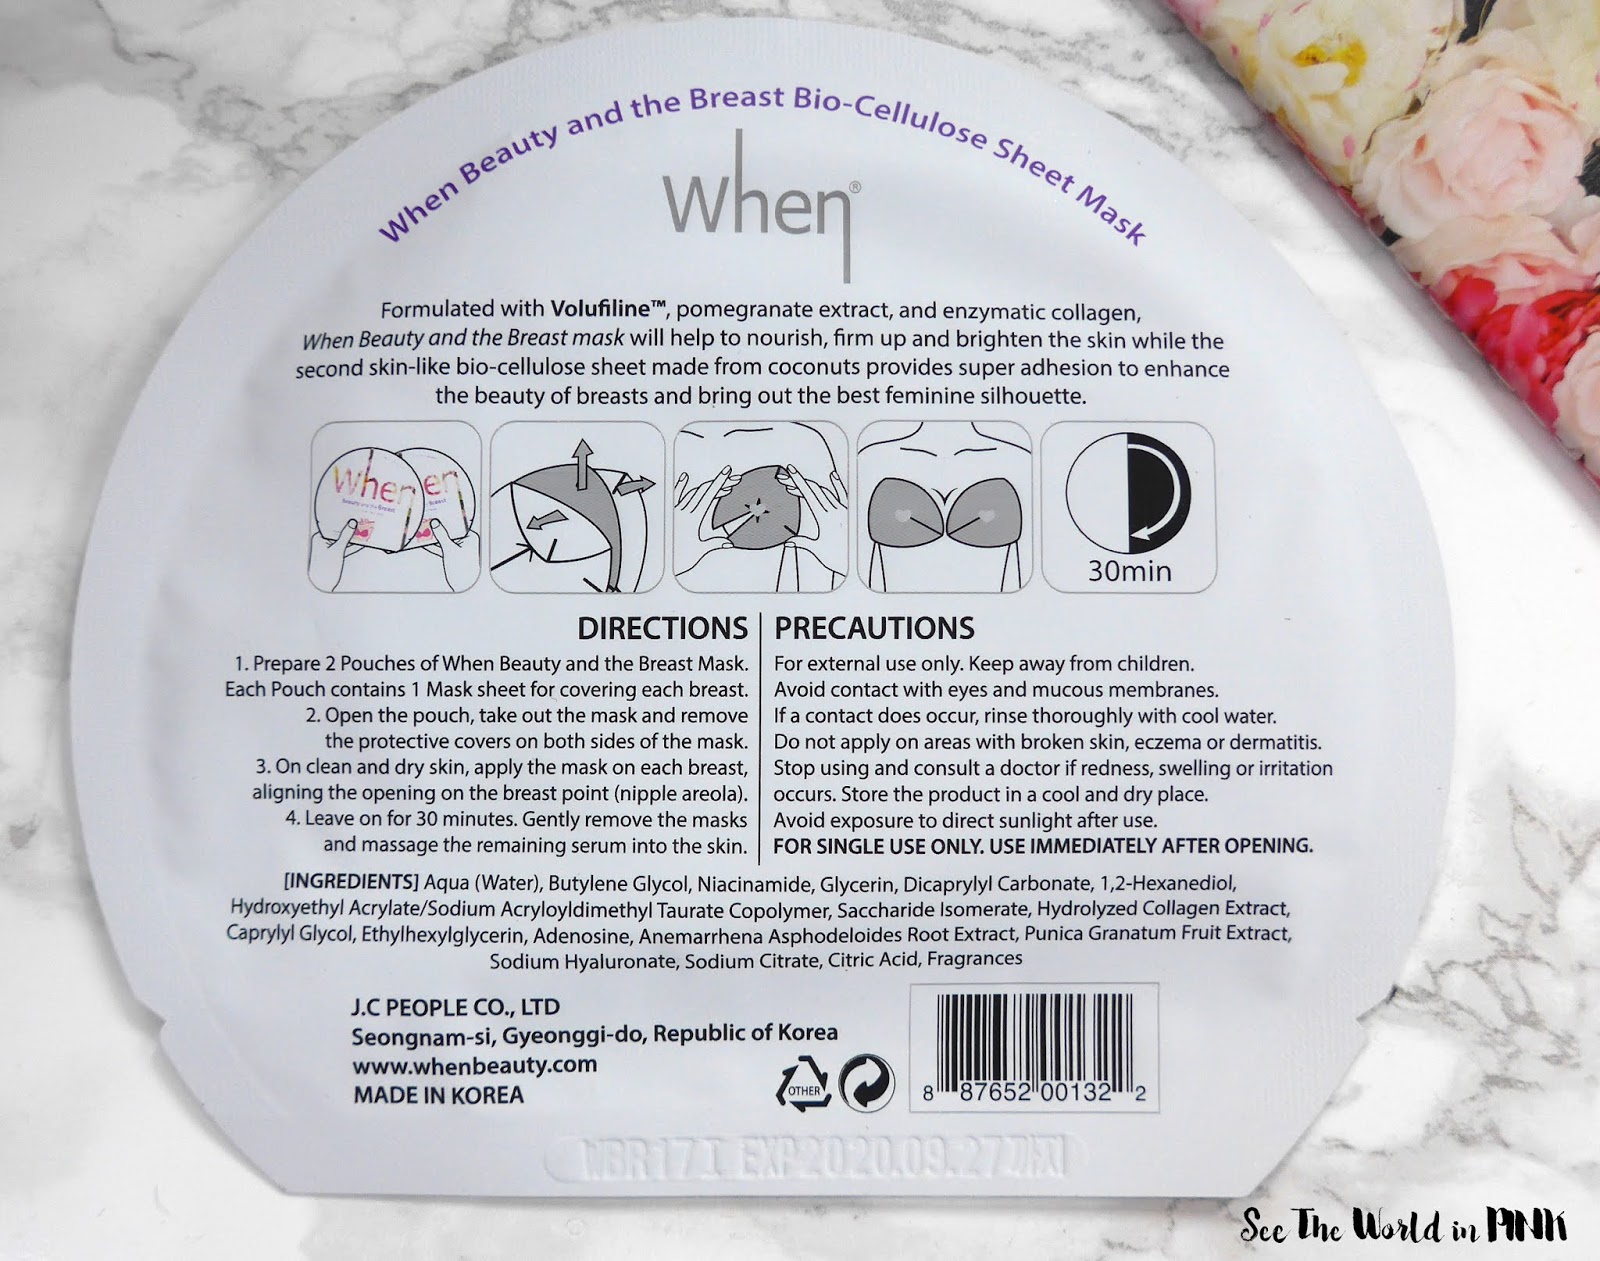 Skincare Sunday - When Beauty and the Breast Bio-Cellulose Body Sheet Mask